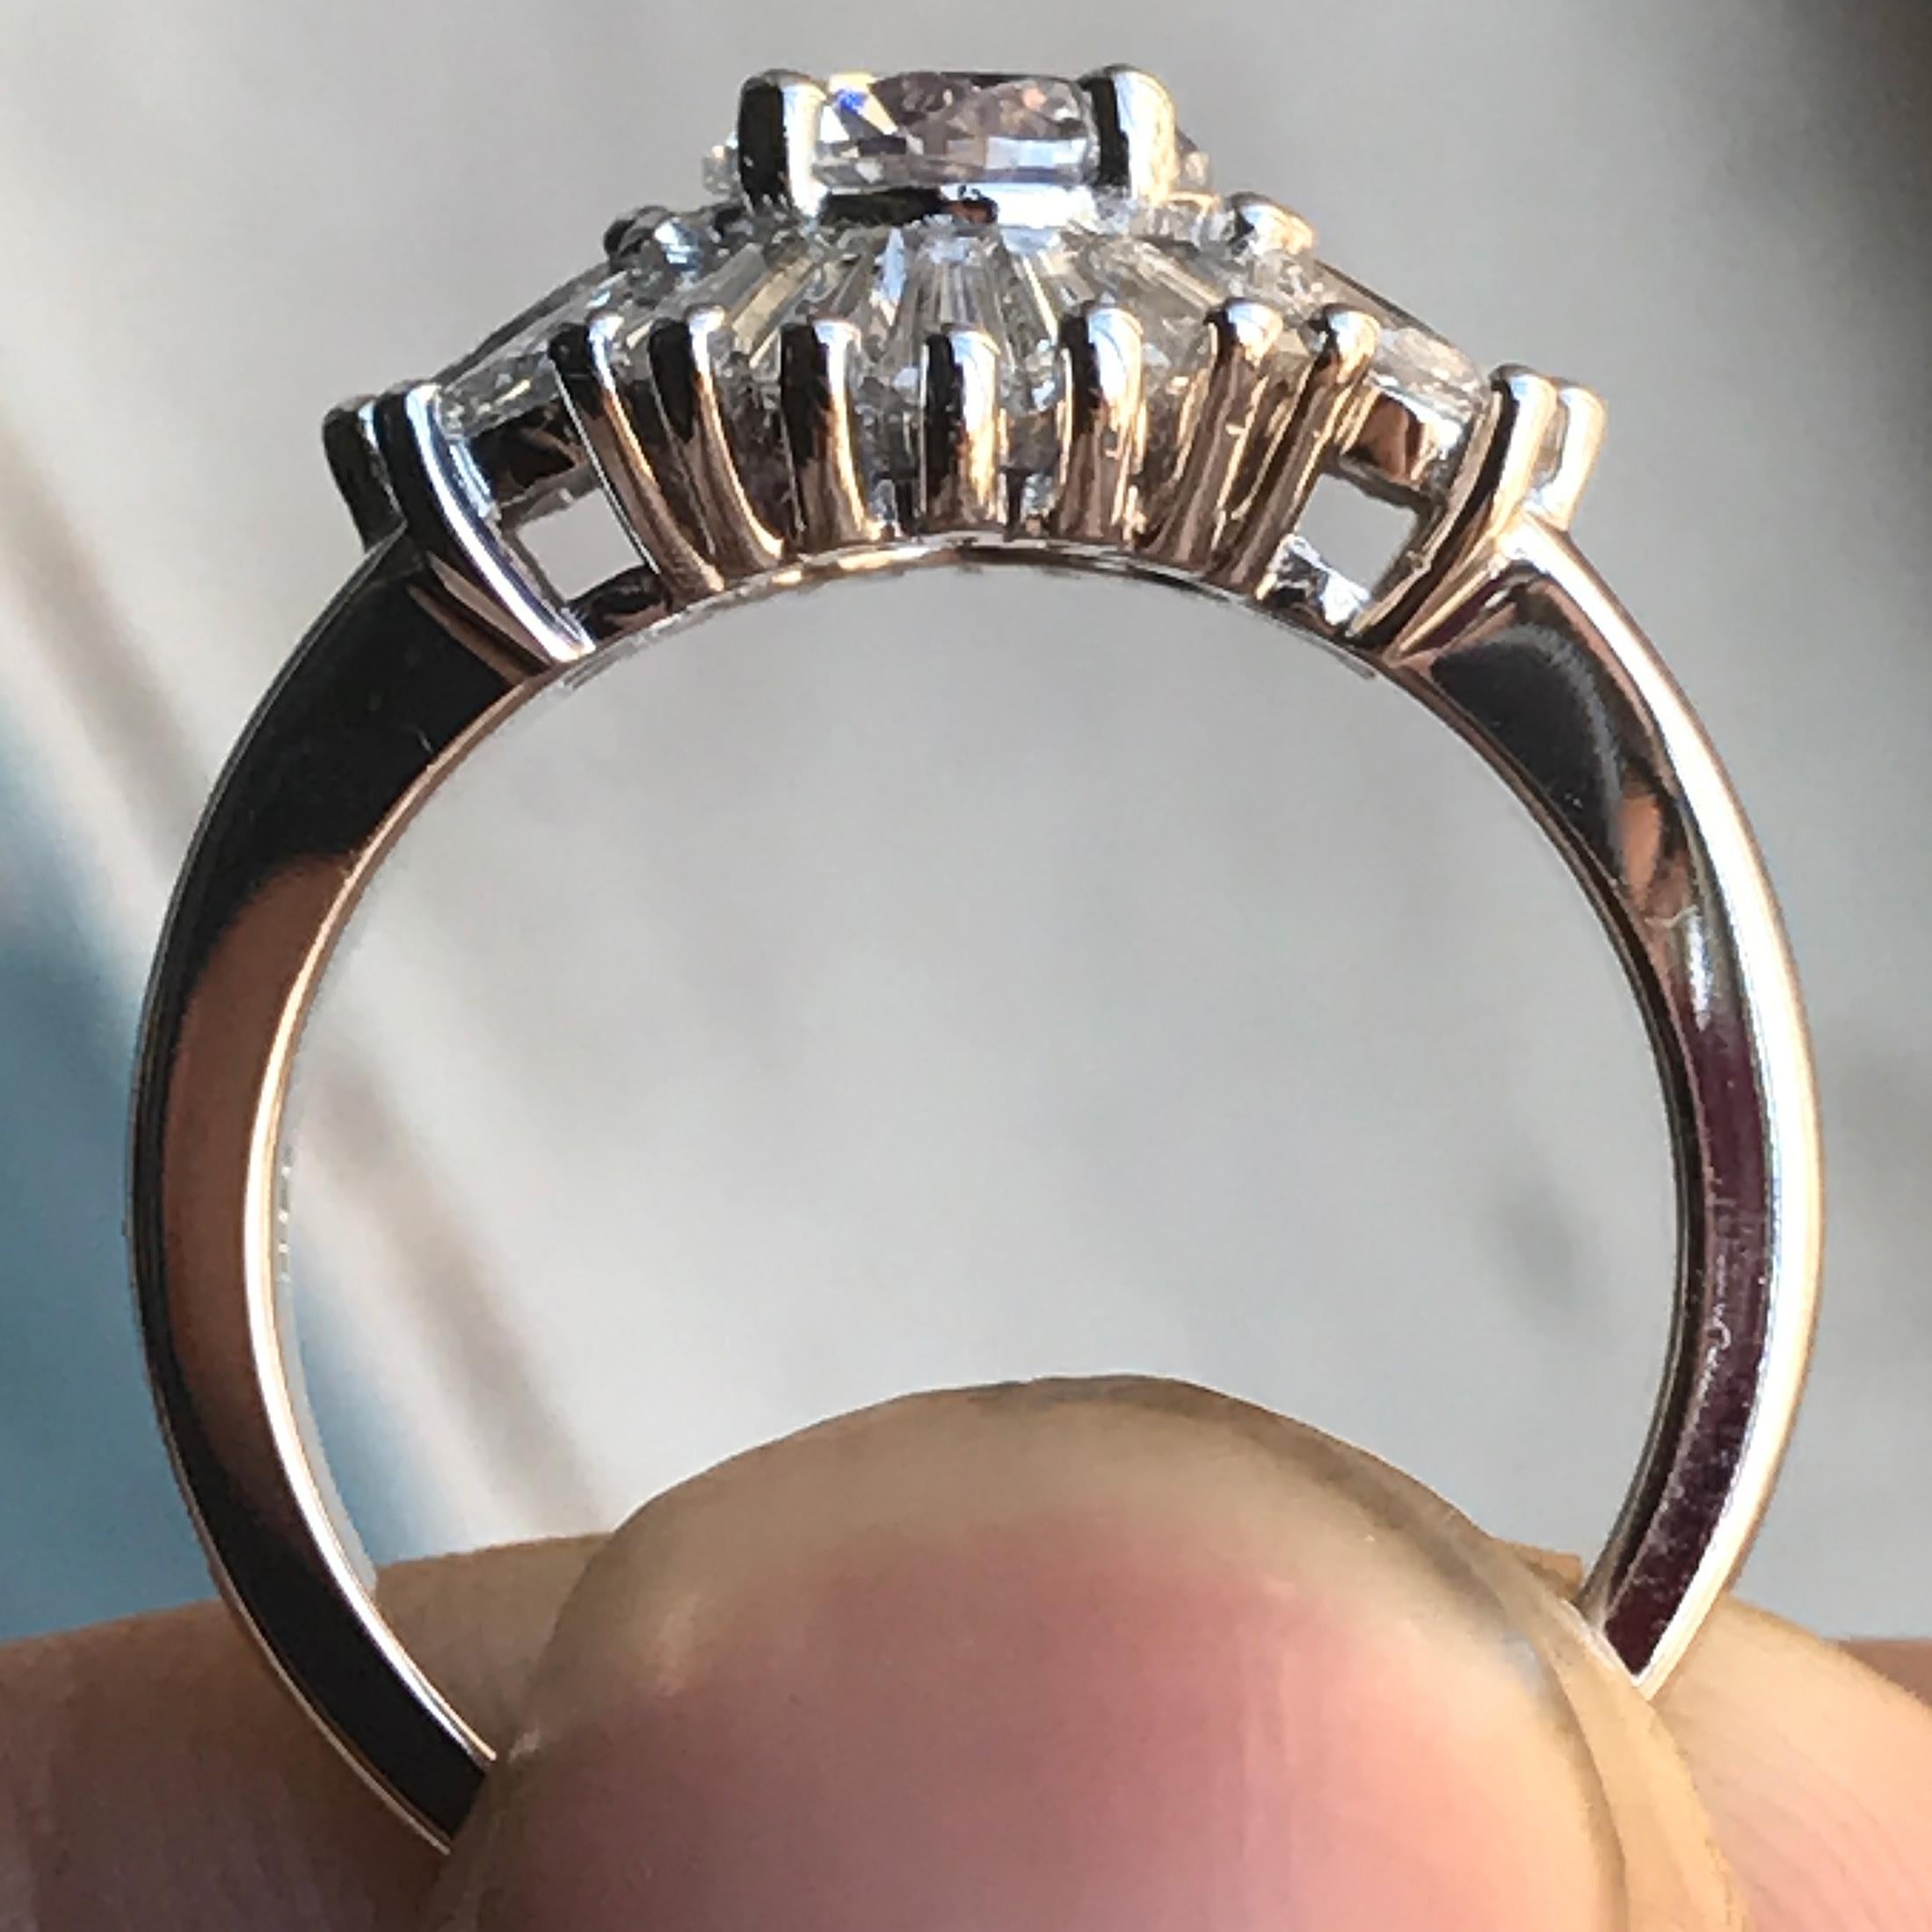 2 Carat Tw Approximate Ballerina Ring 18 Karat White, Ben Dannie Design In New Condition For Sale In West Hollywood, CA